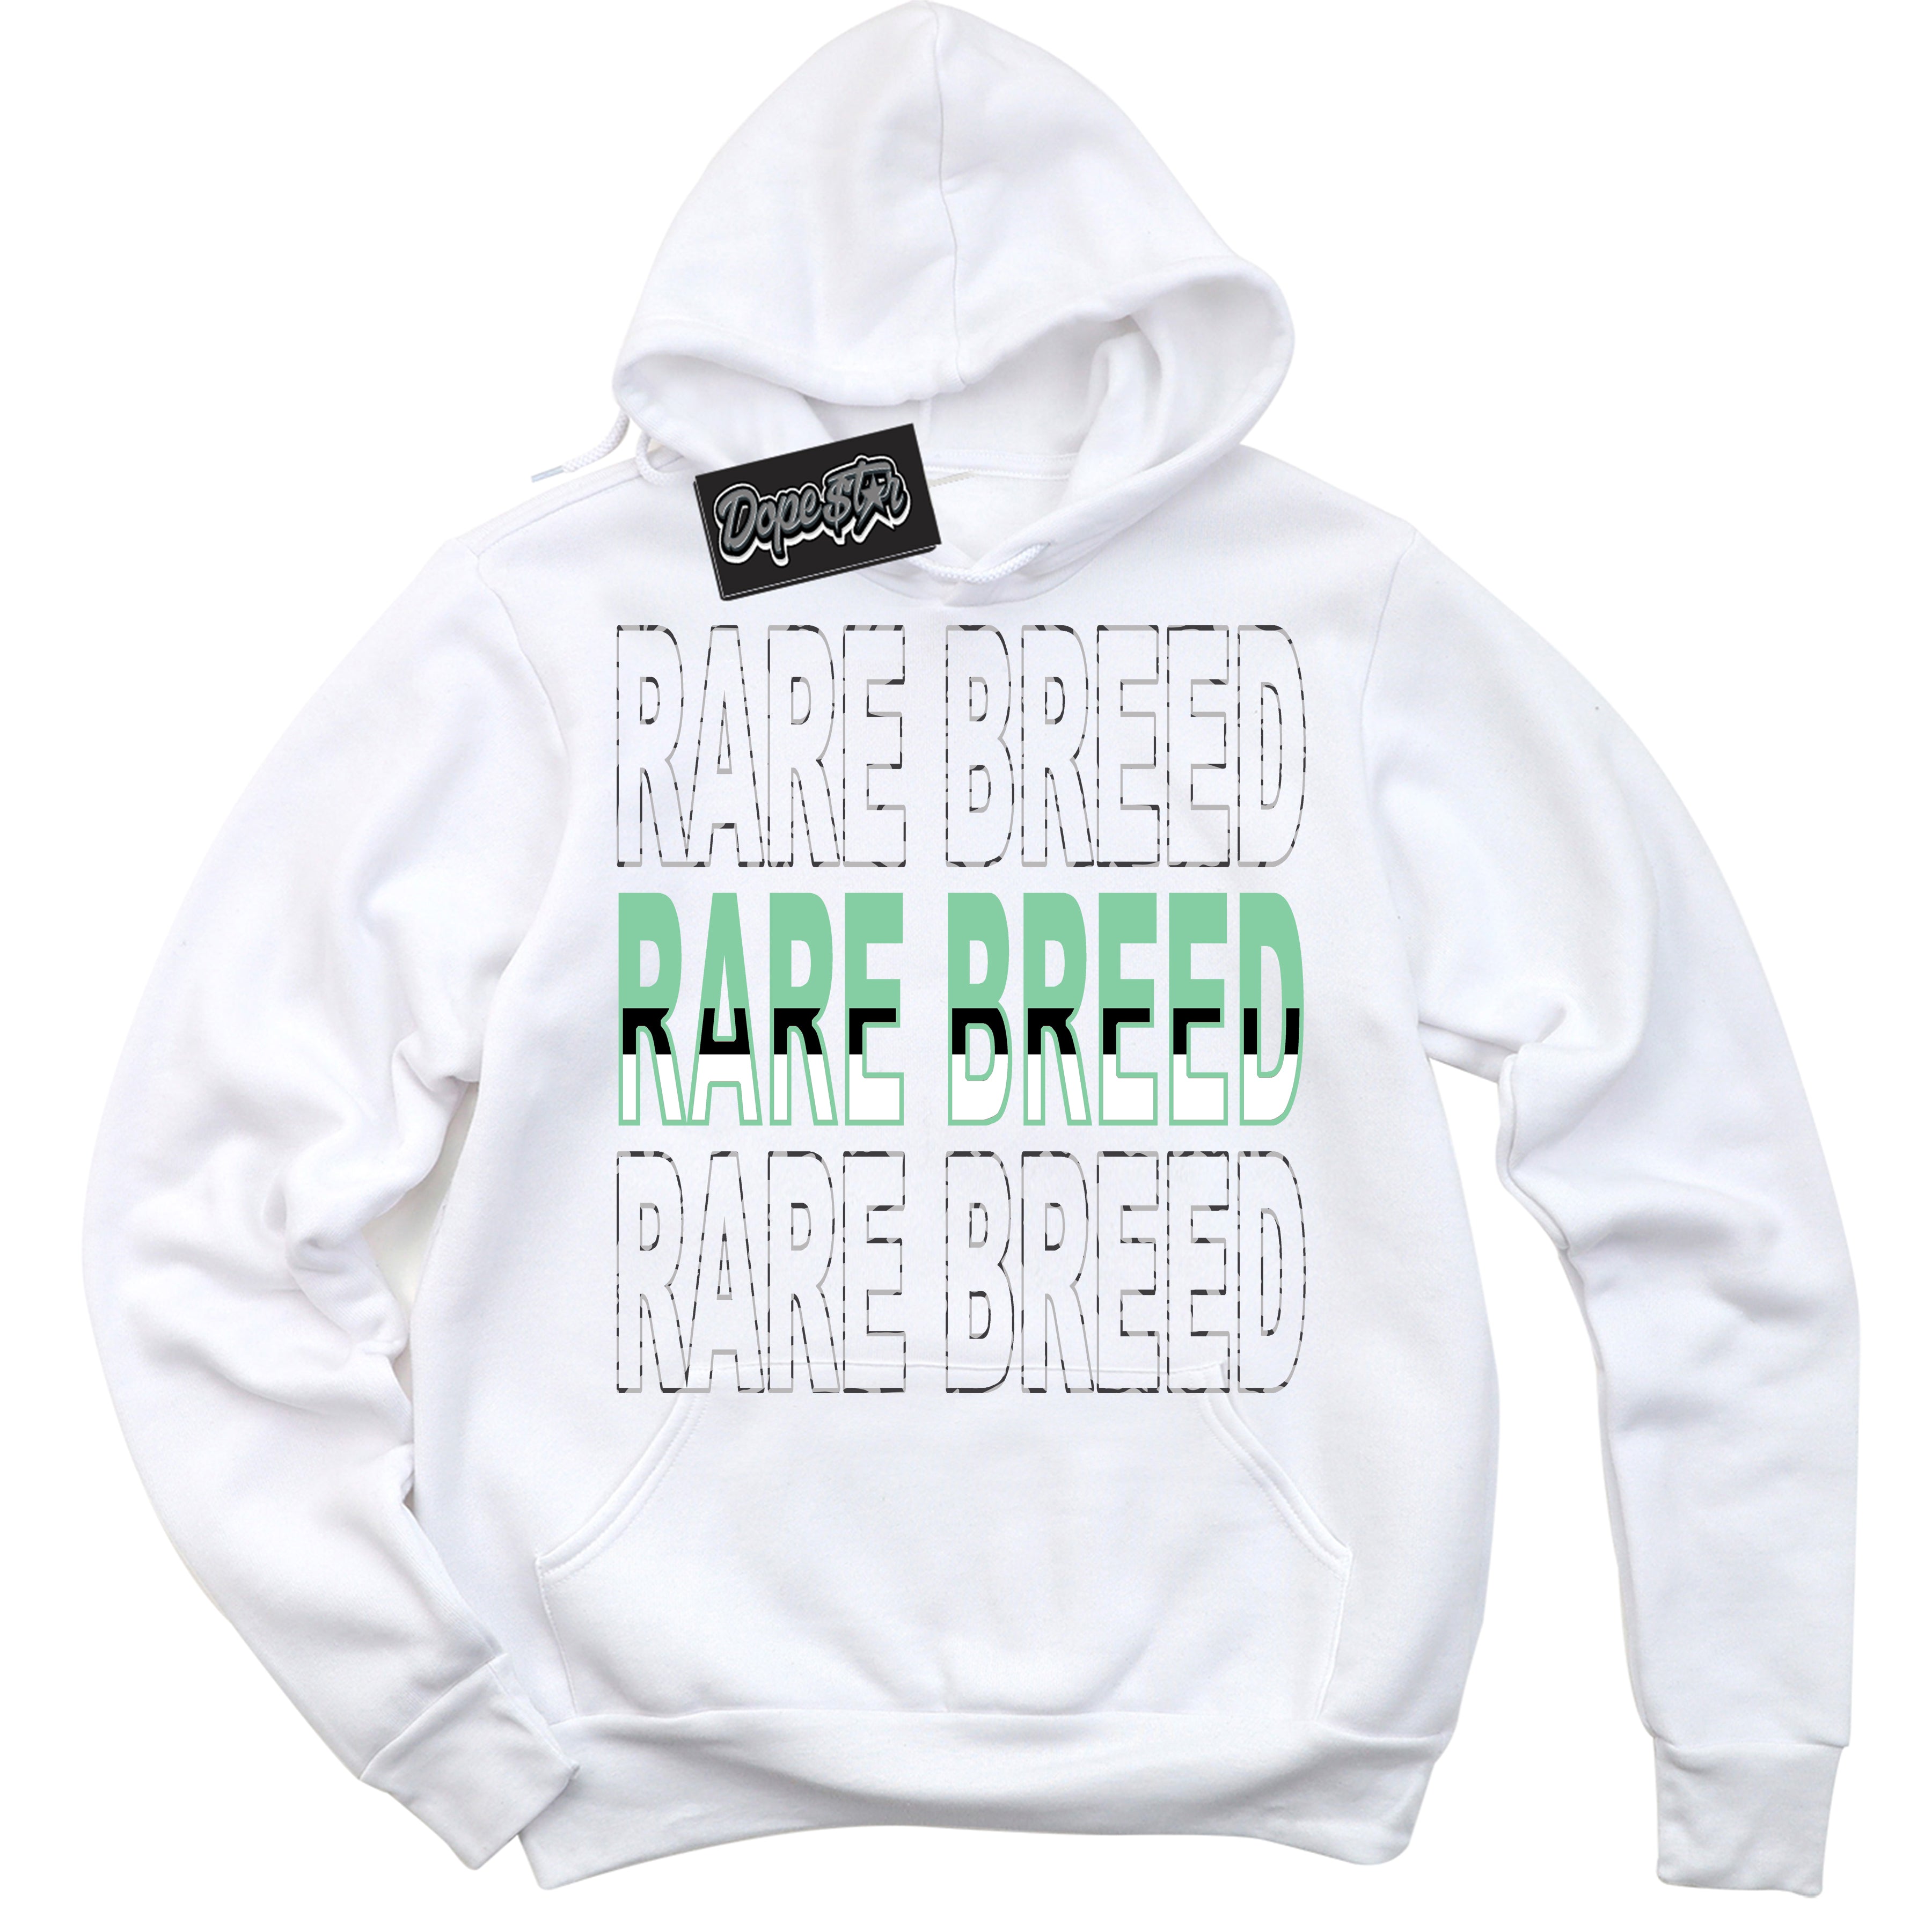 Cool White Graphic DopeStar Hoodie with “ Rare Breed “ print, that perfectly matches Green Glow 3s sneakers